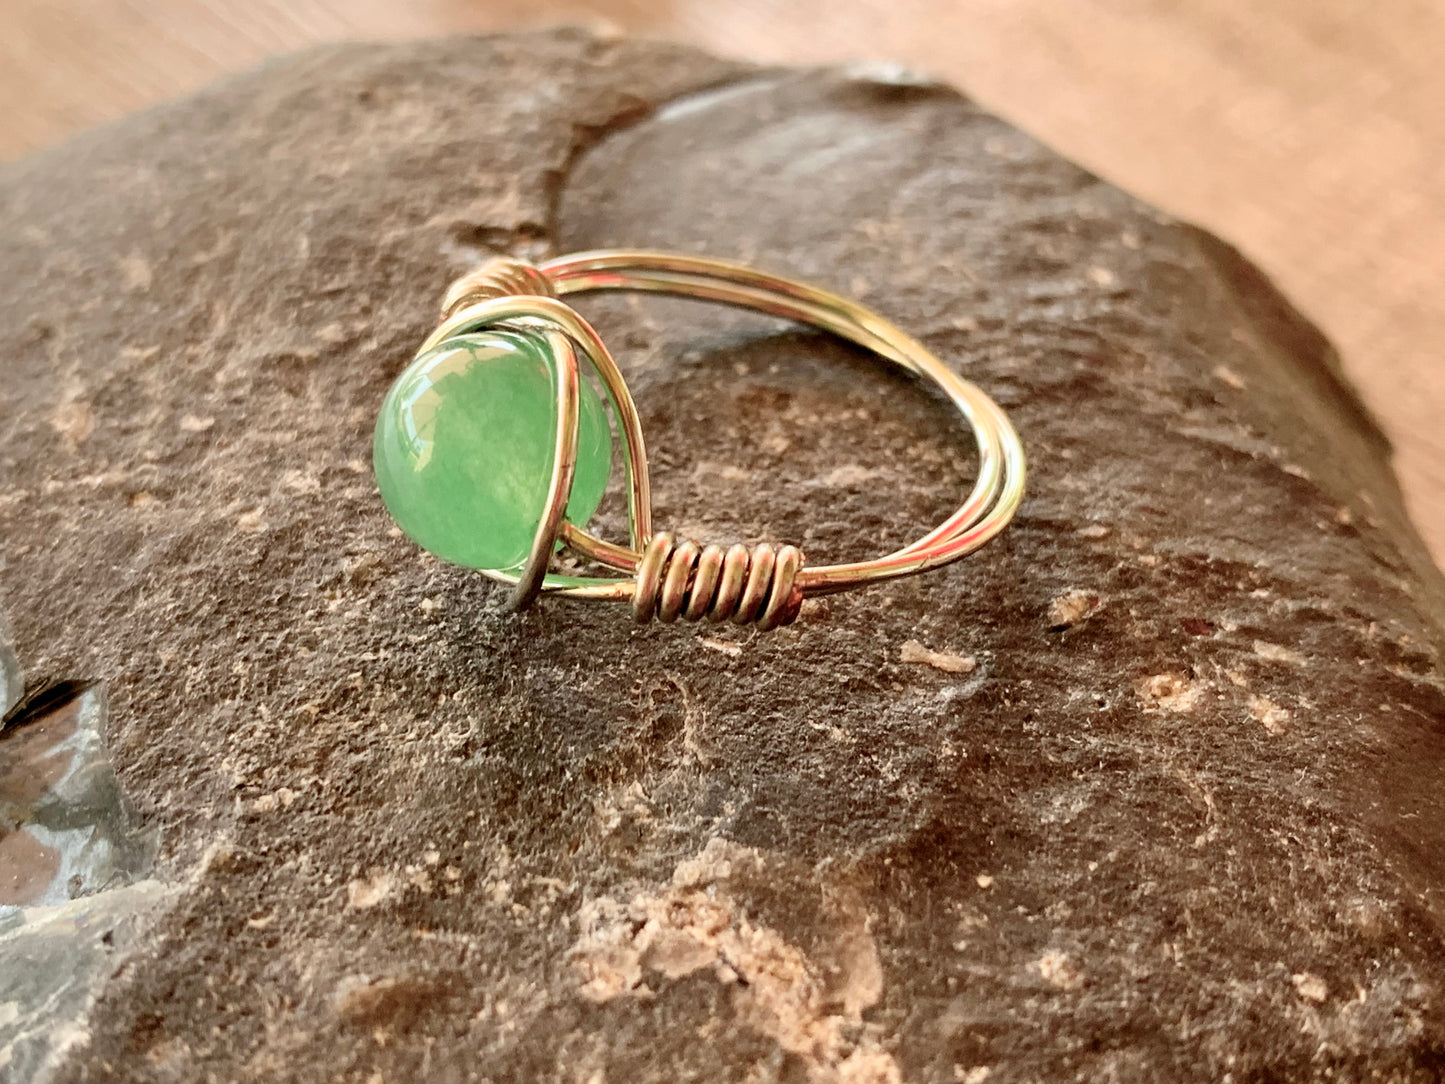 Judith Handmade Green Aventurine Wire Wrapped Ring Size 6